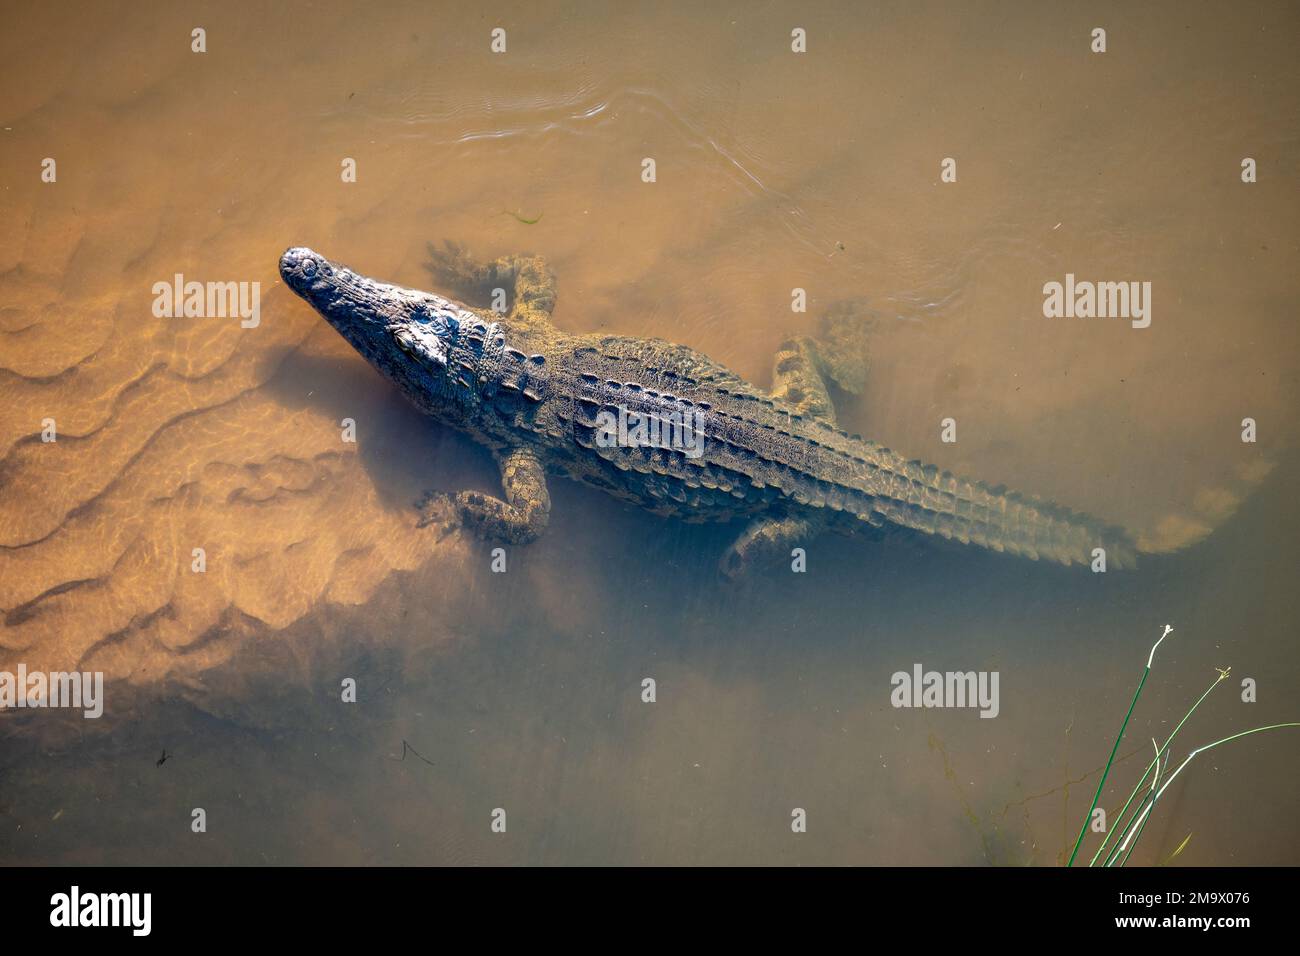 An adult Nile Crocodile (Crocodylus niloticus) in the Crocodile River. Kruger National Park, South Africa. Stock Photo